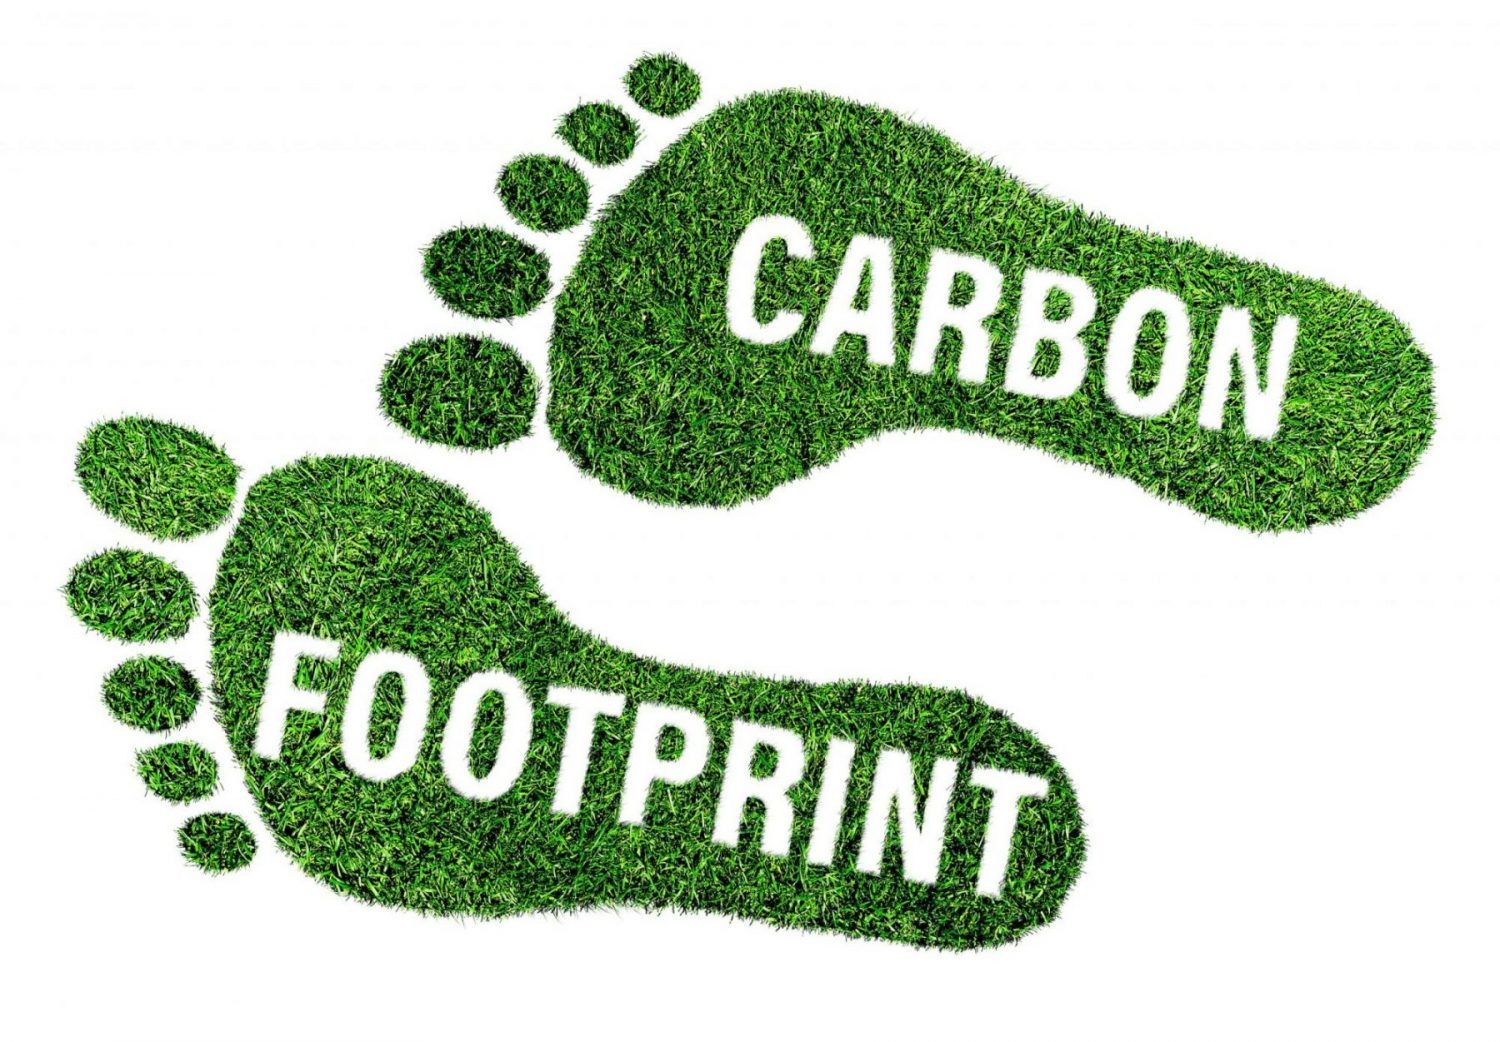 Reducing your company’s carbon footprint